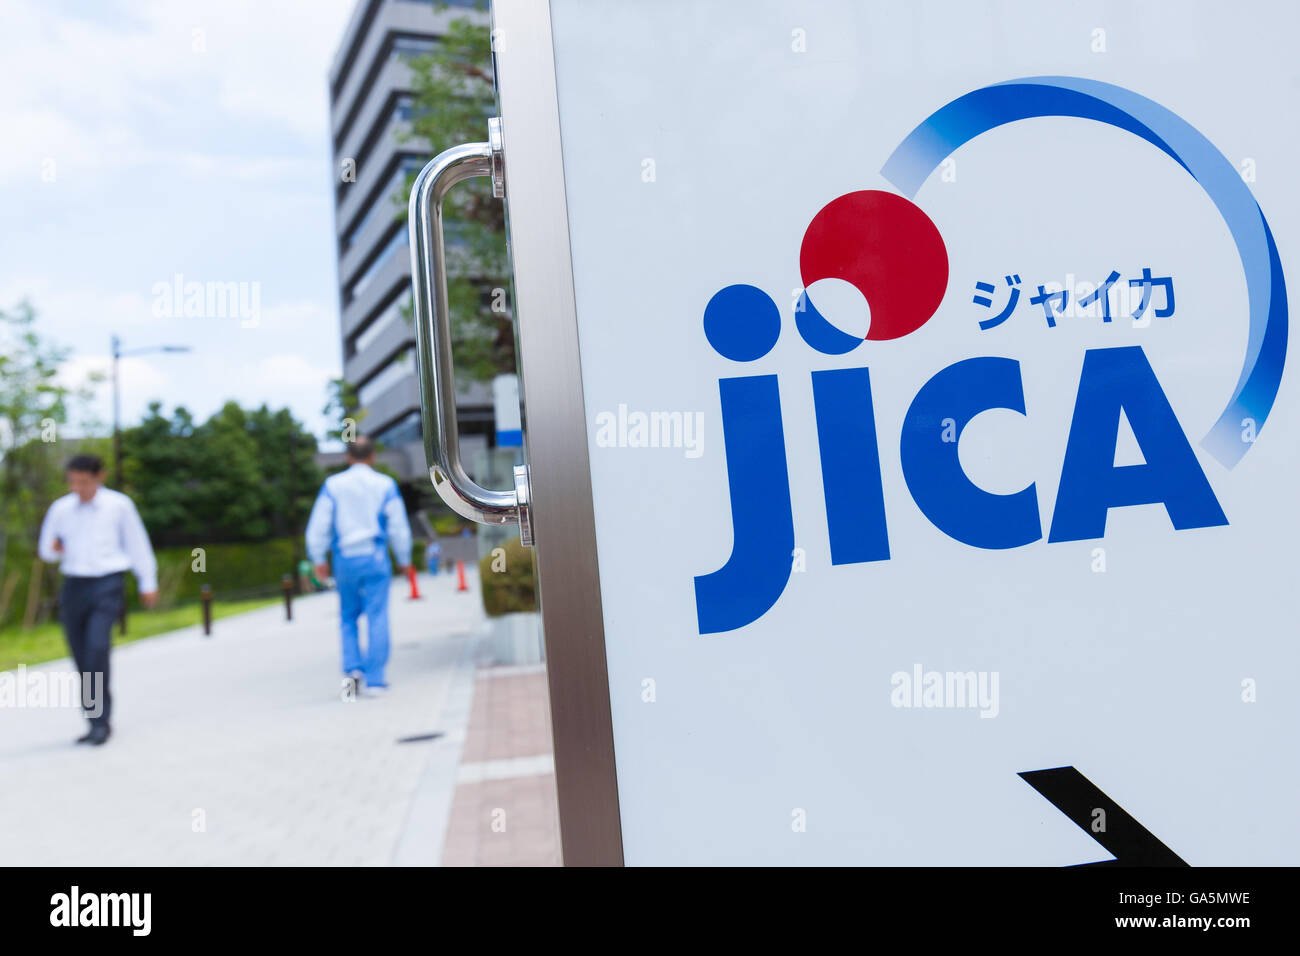 Pedestrians walk past a JICA signboard on display outside its Ichigaya building in Tokyo on July 4, 2016, Japan. Seven Japanese working on a transportation infrastructure project managed by the International Cooperation Agency (JICA) were among 28 who died in a terrorist attack on a cafe in Bangladesh's capital, Dhaka, on July 1st. The Japanese Prime Minister Shinzo Abe expressed his anger over the attack calling it an unforgivable act of terrorism and JICA's President Shinichi Kitaoka also expressed his grief after hearing that seven Japanese had been killed. (Photo by Rodrigo Reyes Marin/AFL Stock Photo